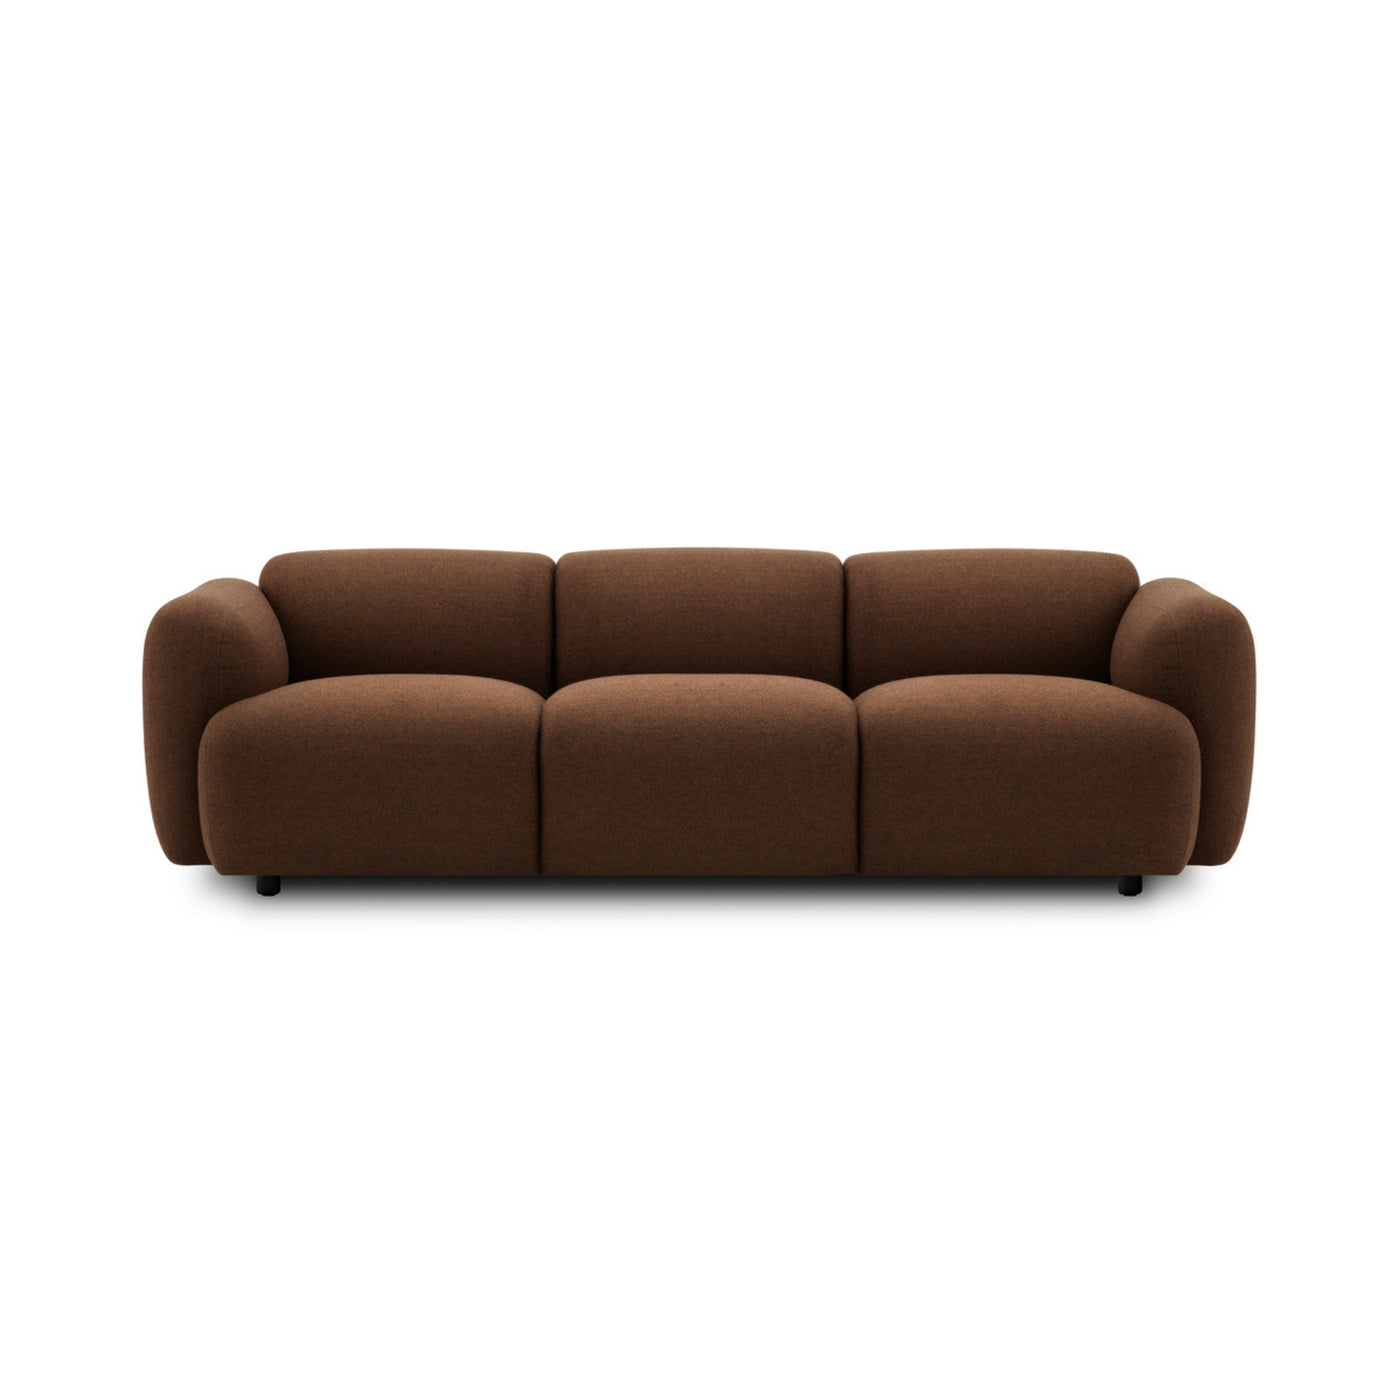 Normann Copenhagen Swell 3 Seater Sofa at someday designs. #colour_synergy-collective